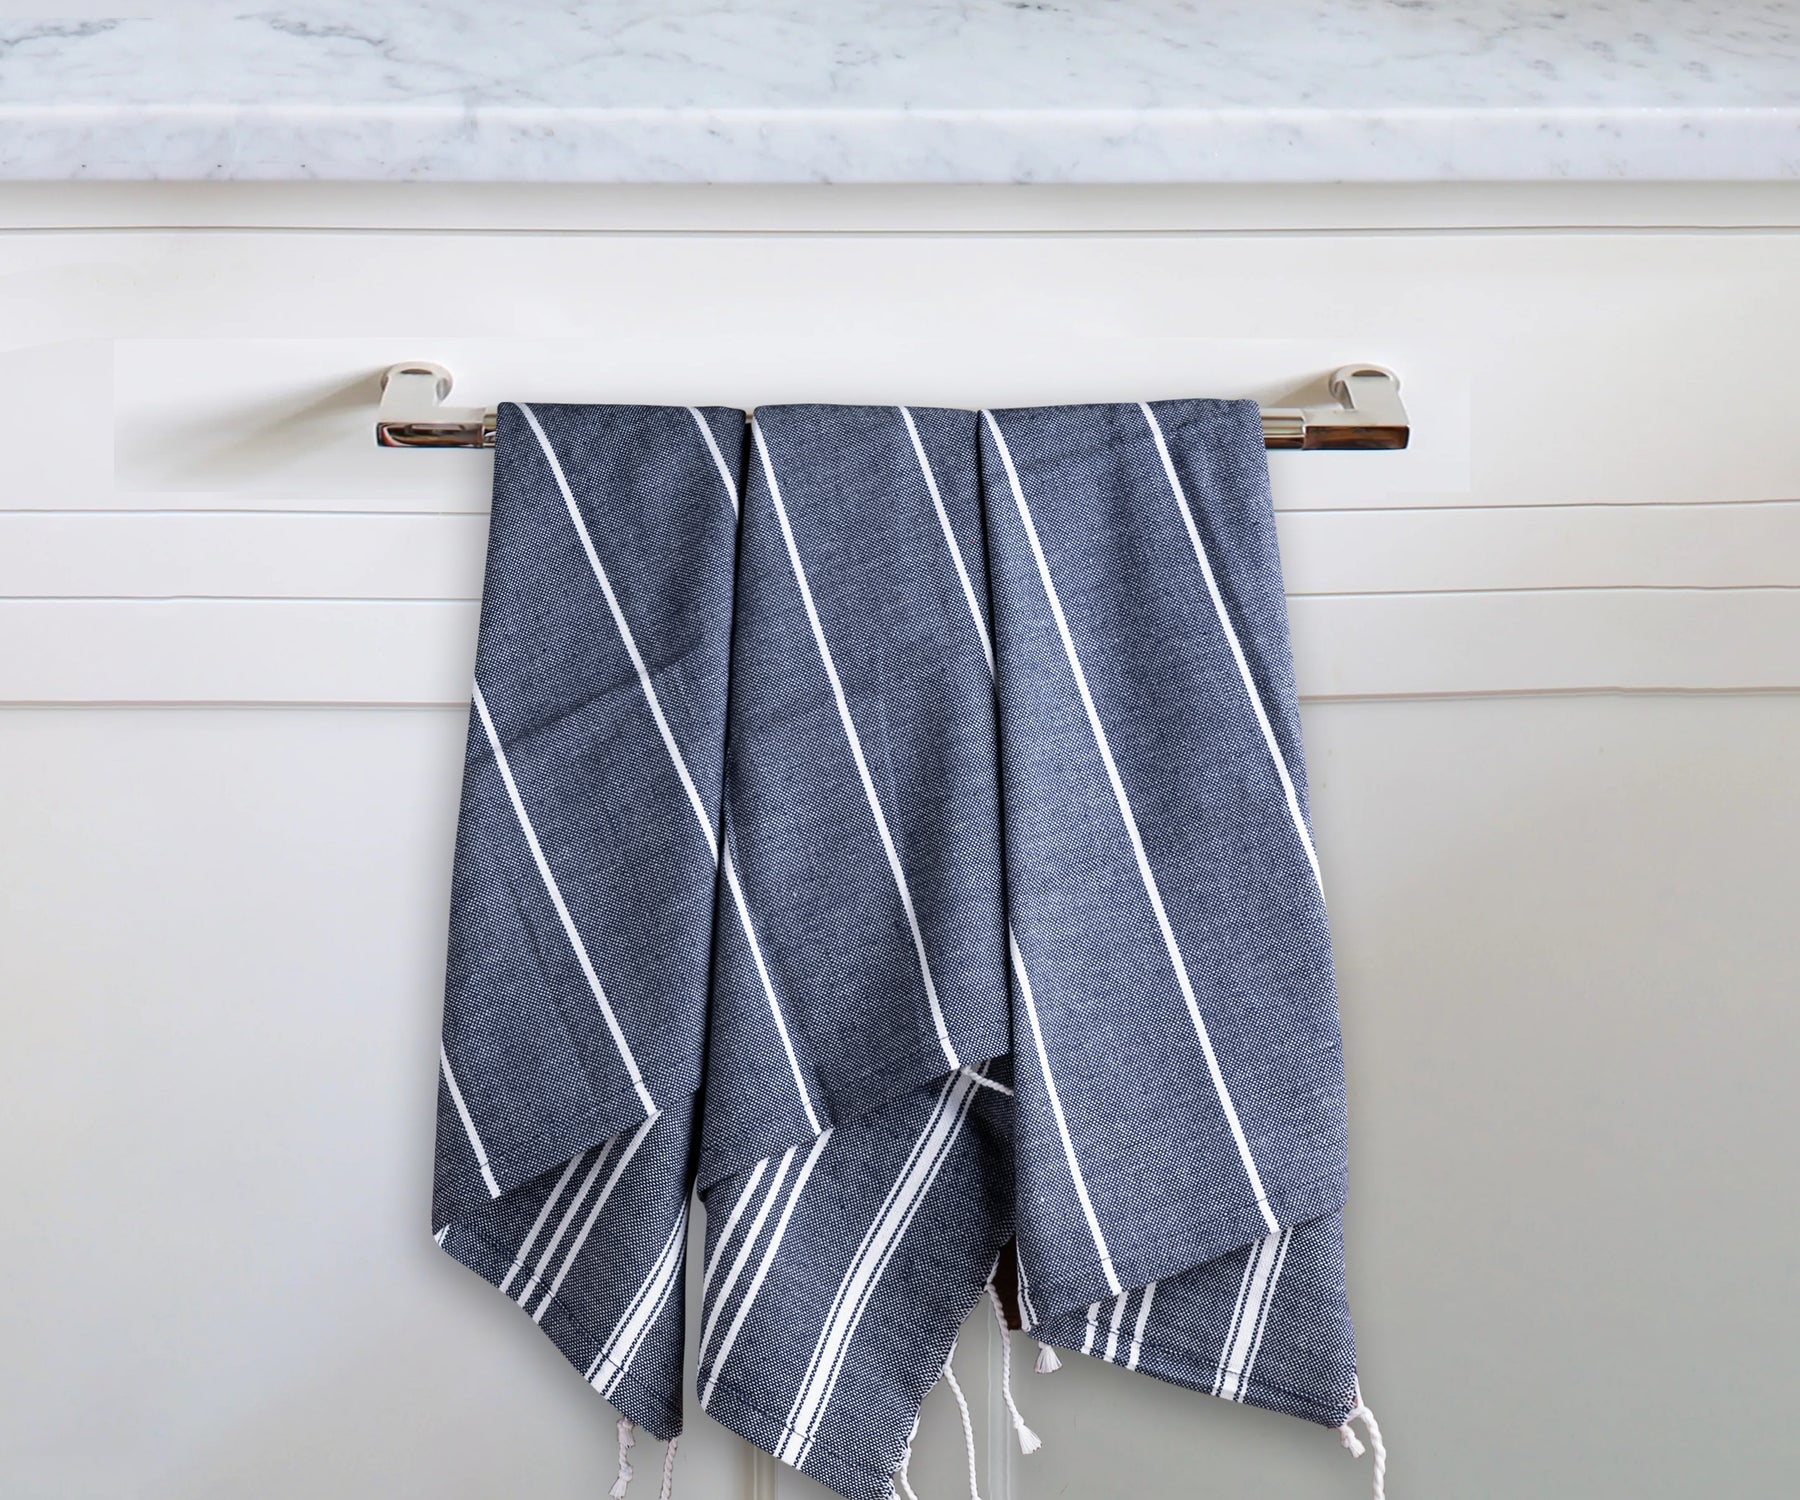 Fecido Classic Dark Kitchen Dish Towels with Hanging Loop - Heavy